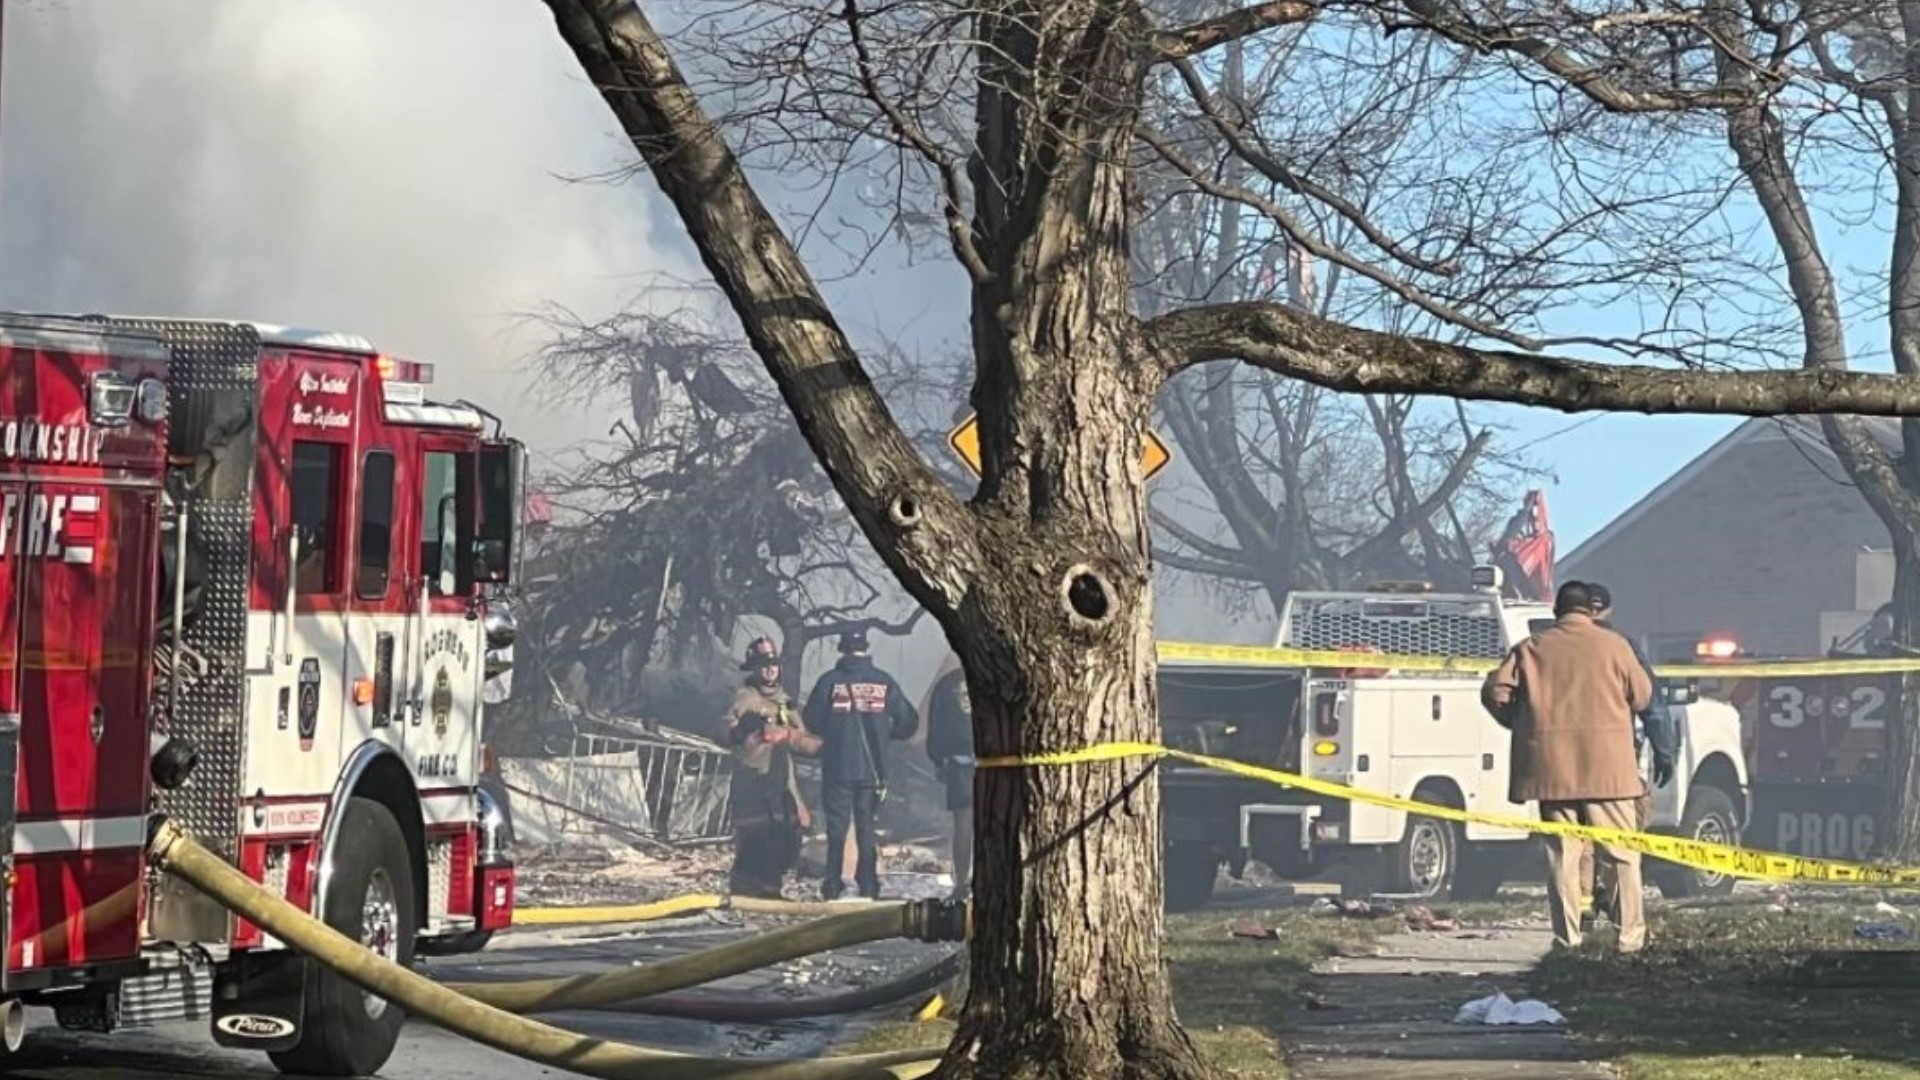 Crews were dispatched to a dwelling fire shortly after 10 a.m. Tuesday. Later dispatch reports indicate it was a gas explosion.